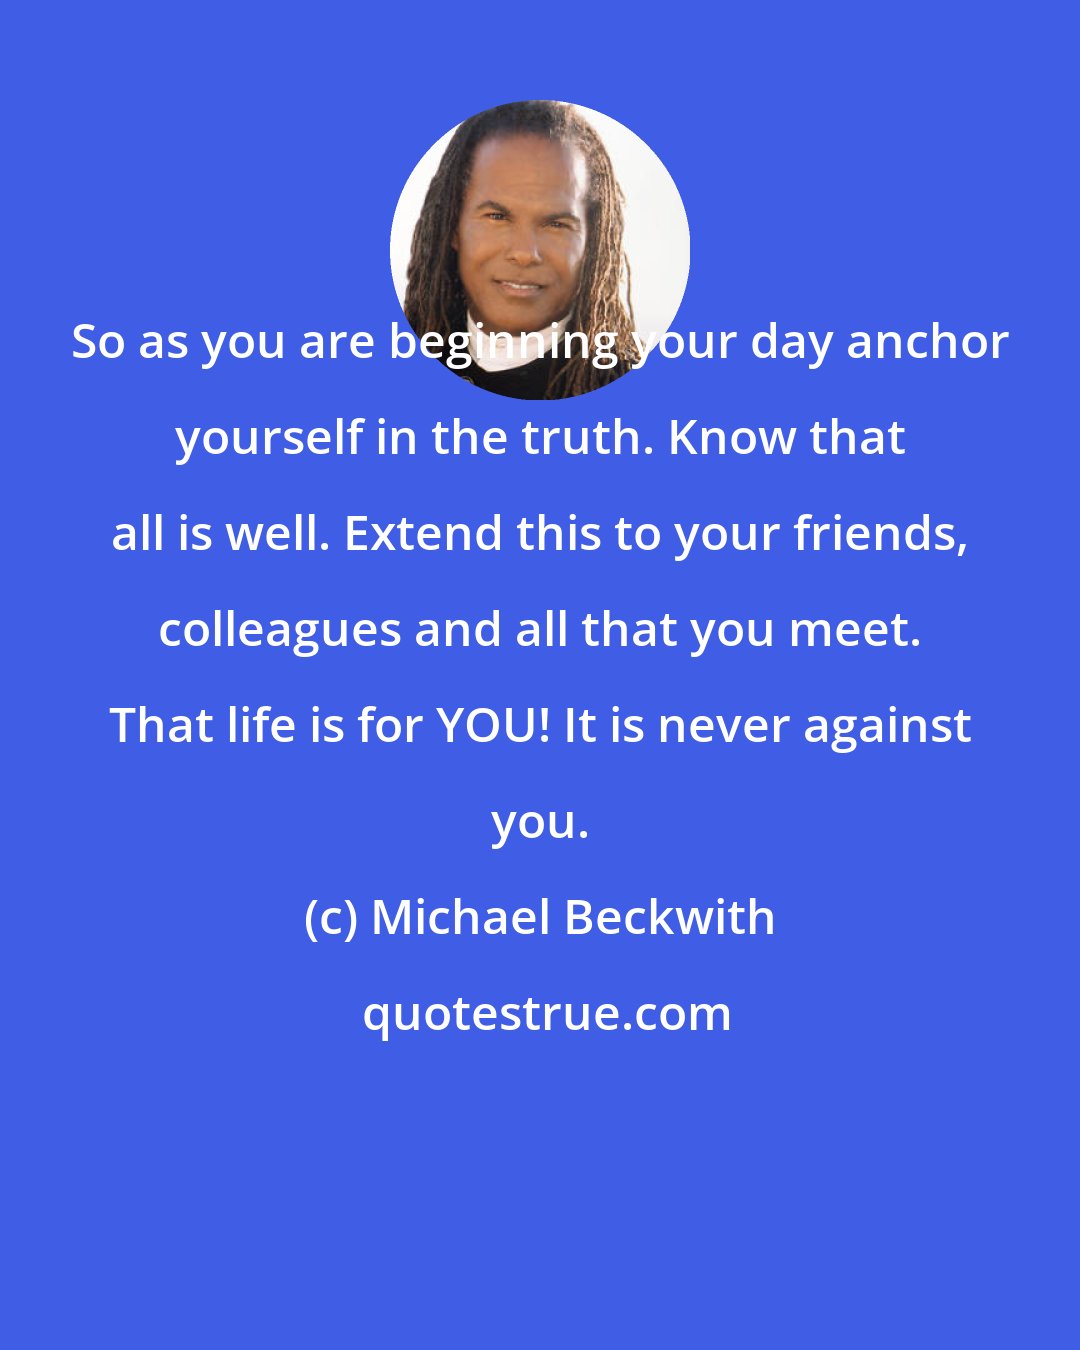 Michael Beckwith: So as you are beginning your day anchor yourself in the truth. Know that all is well. Extend this to your friends, colleagues and all that you meet. That life is for YOU! It is never against you.